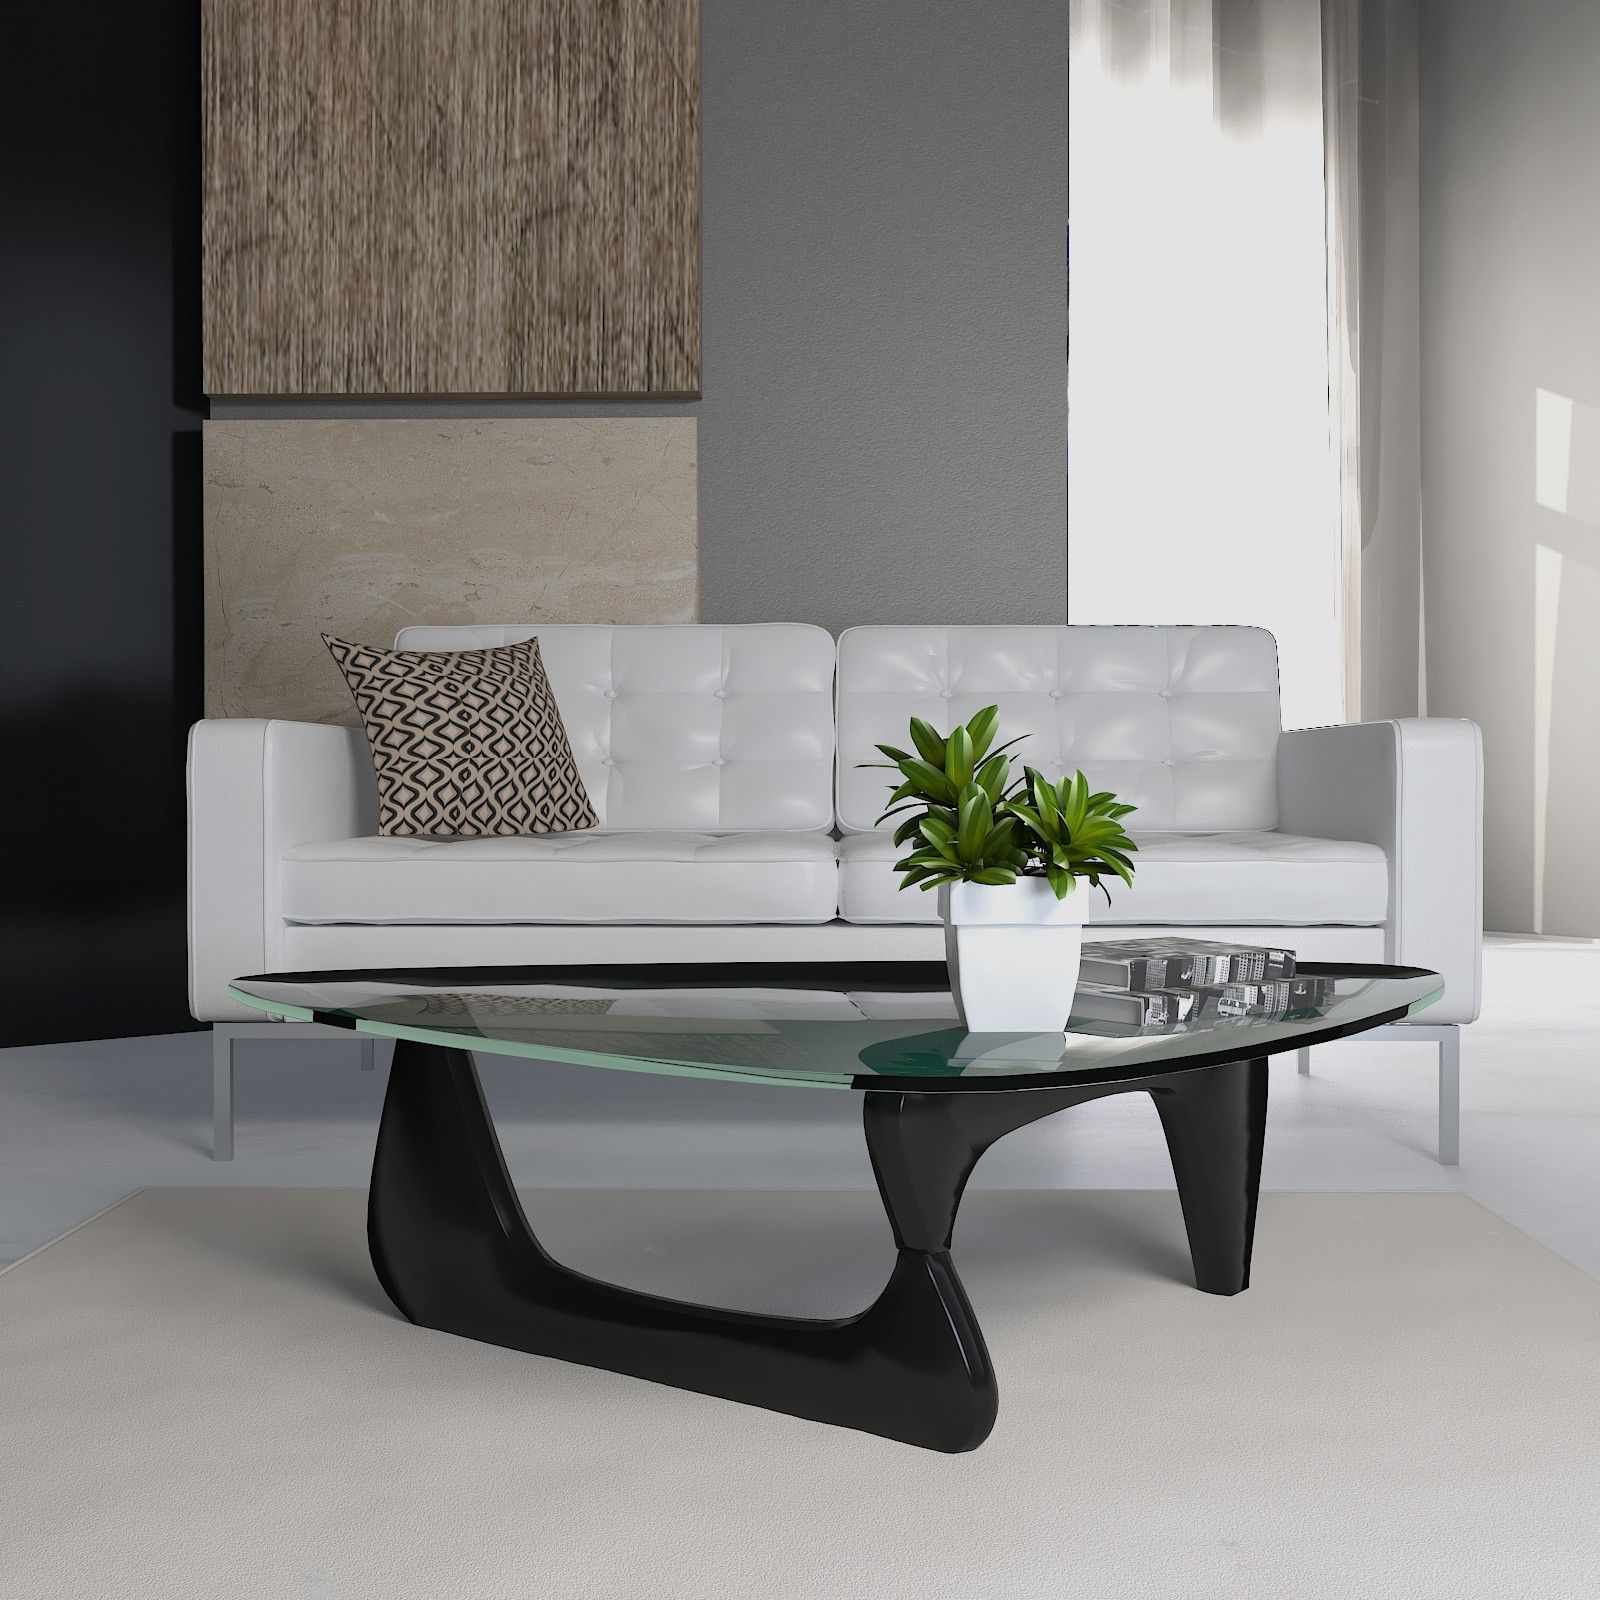 Isamu Noguchi Coffee Table – Glass With Black Wood Base Inside Preferred Espresso Wood And Glass Top Coffee Tables (Gallery 12 of 20)